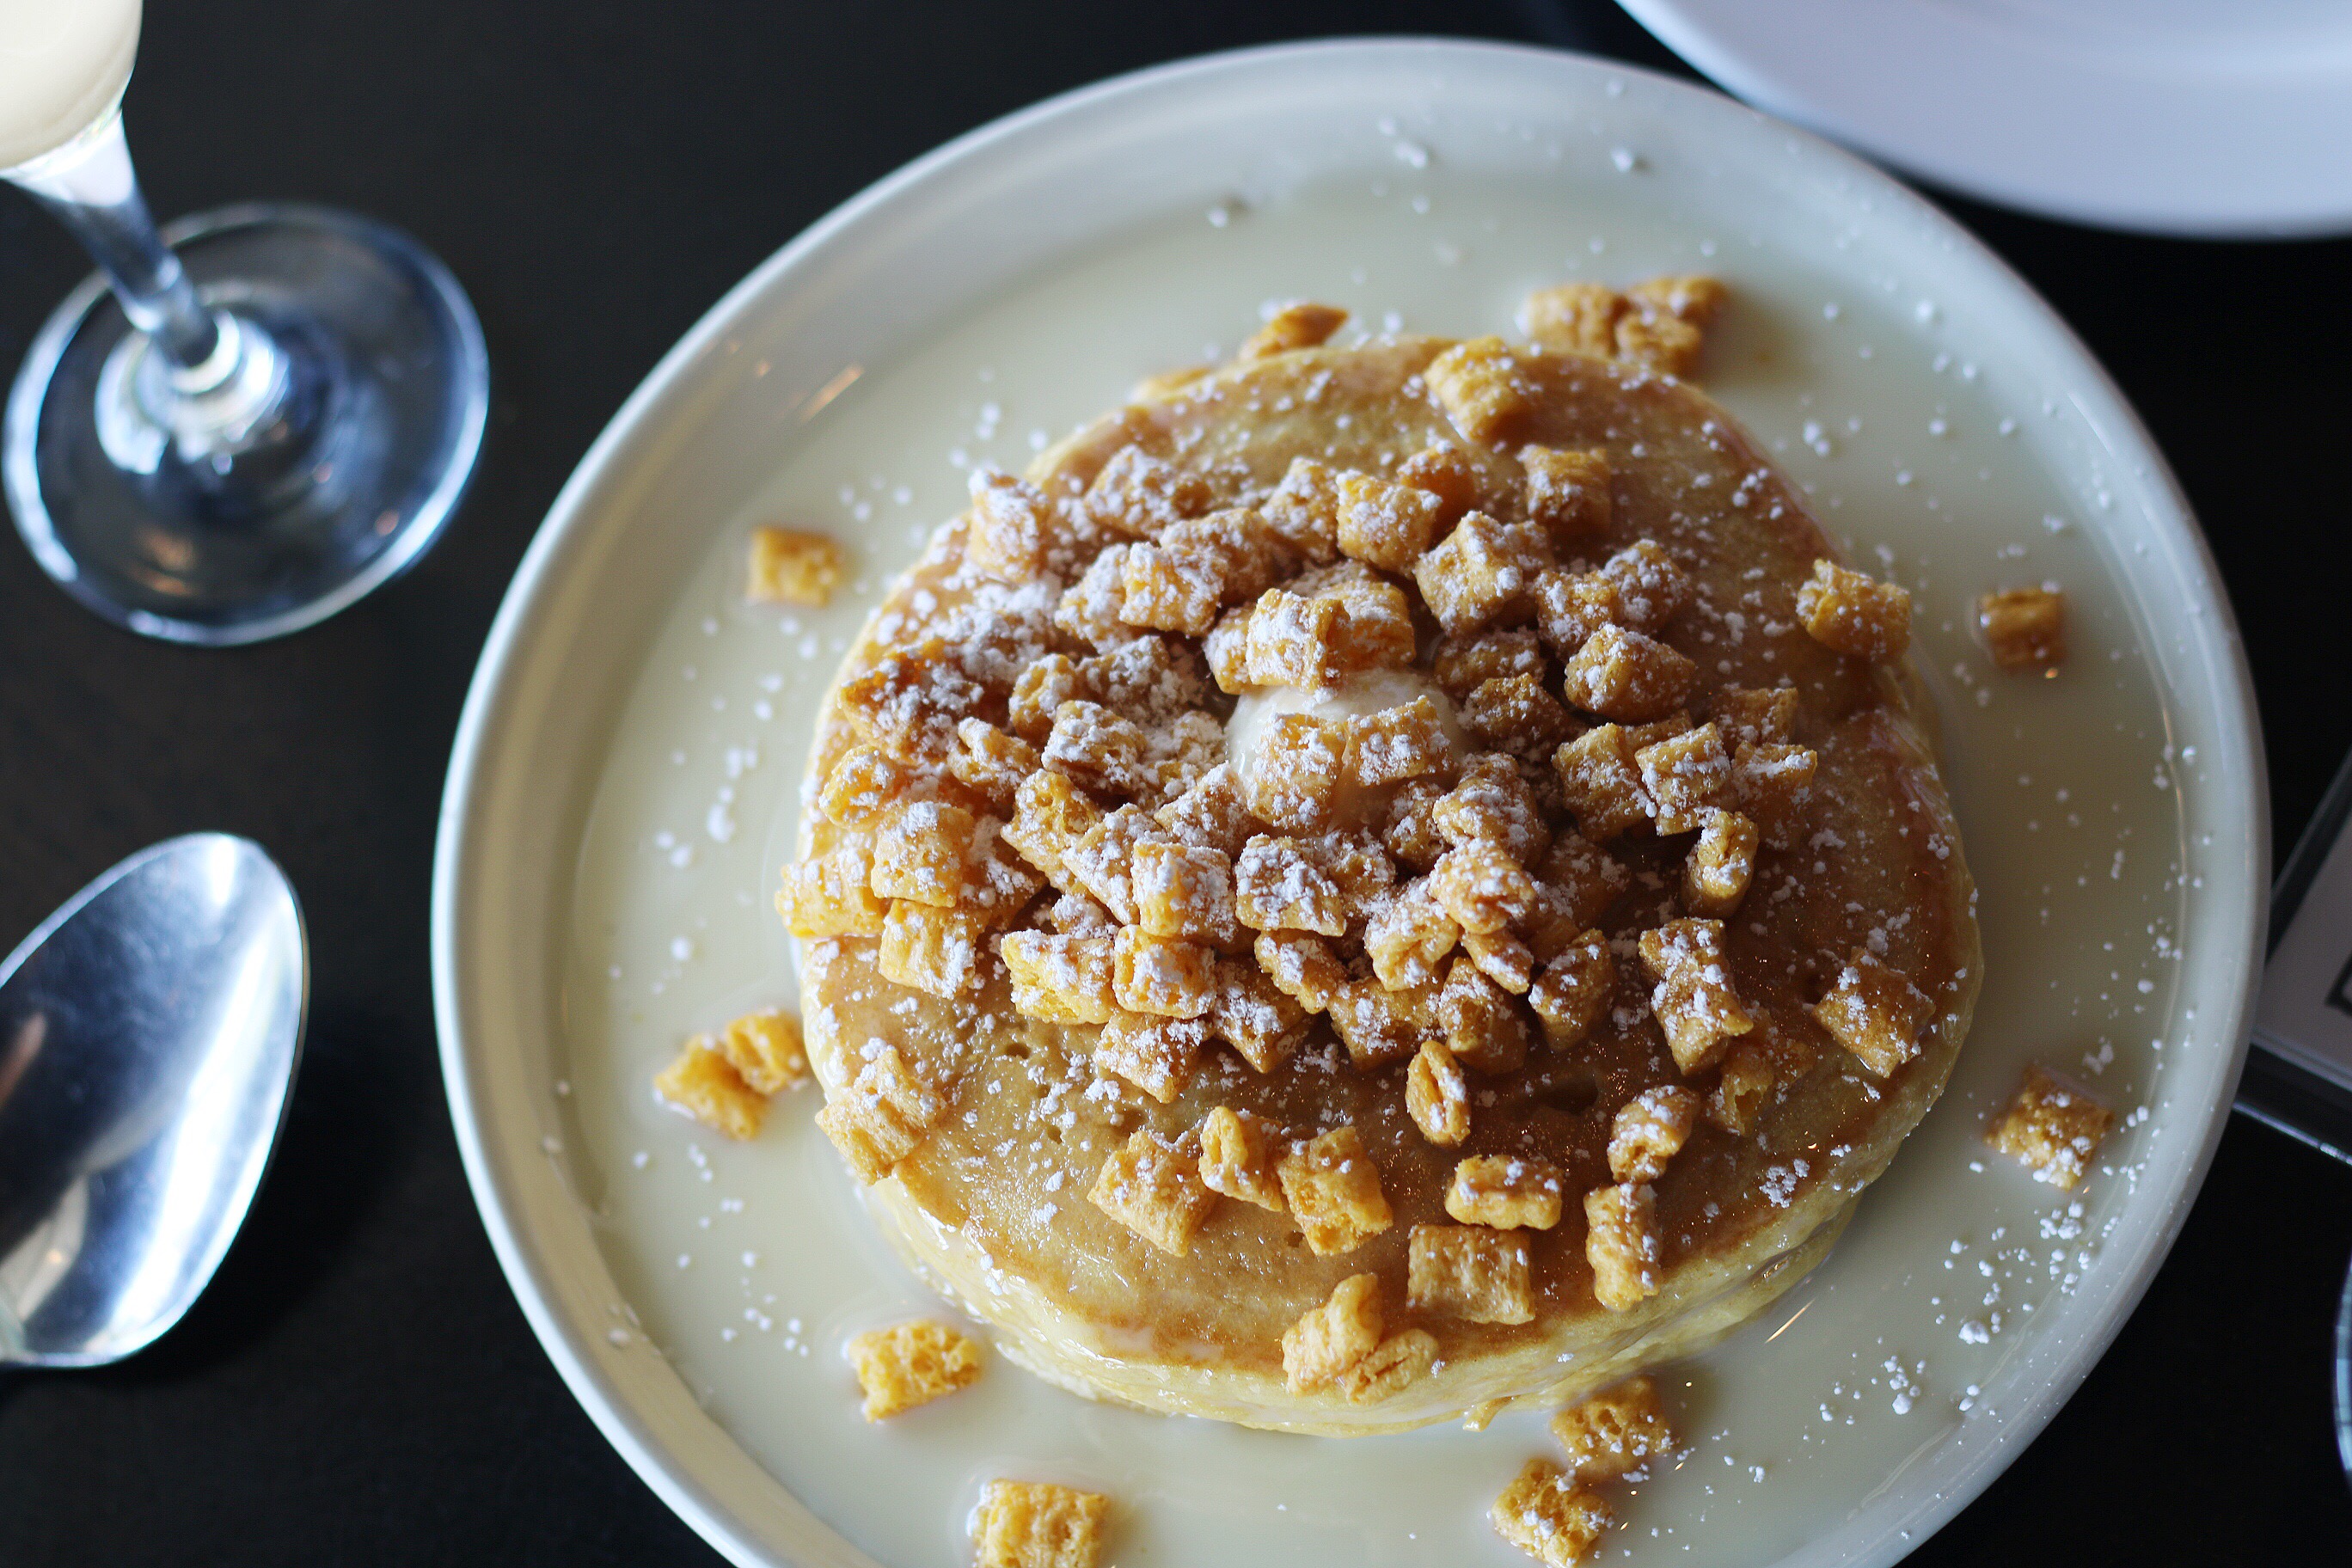 For the best pancakes in Miami make reservations at Eating House in Coral Gables